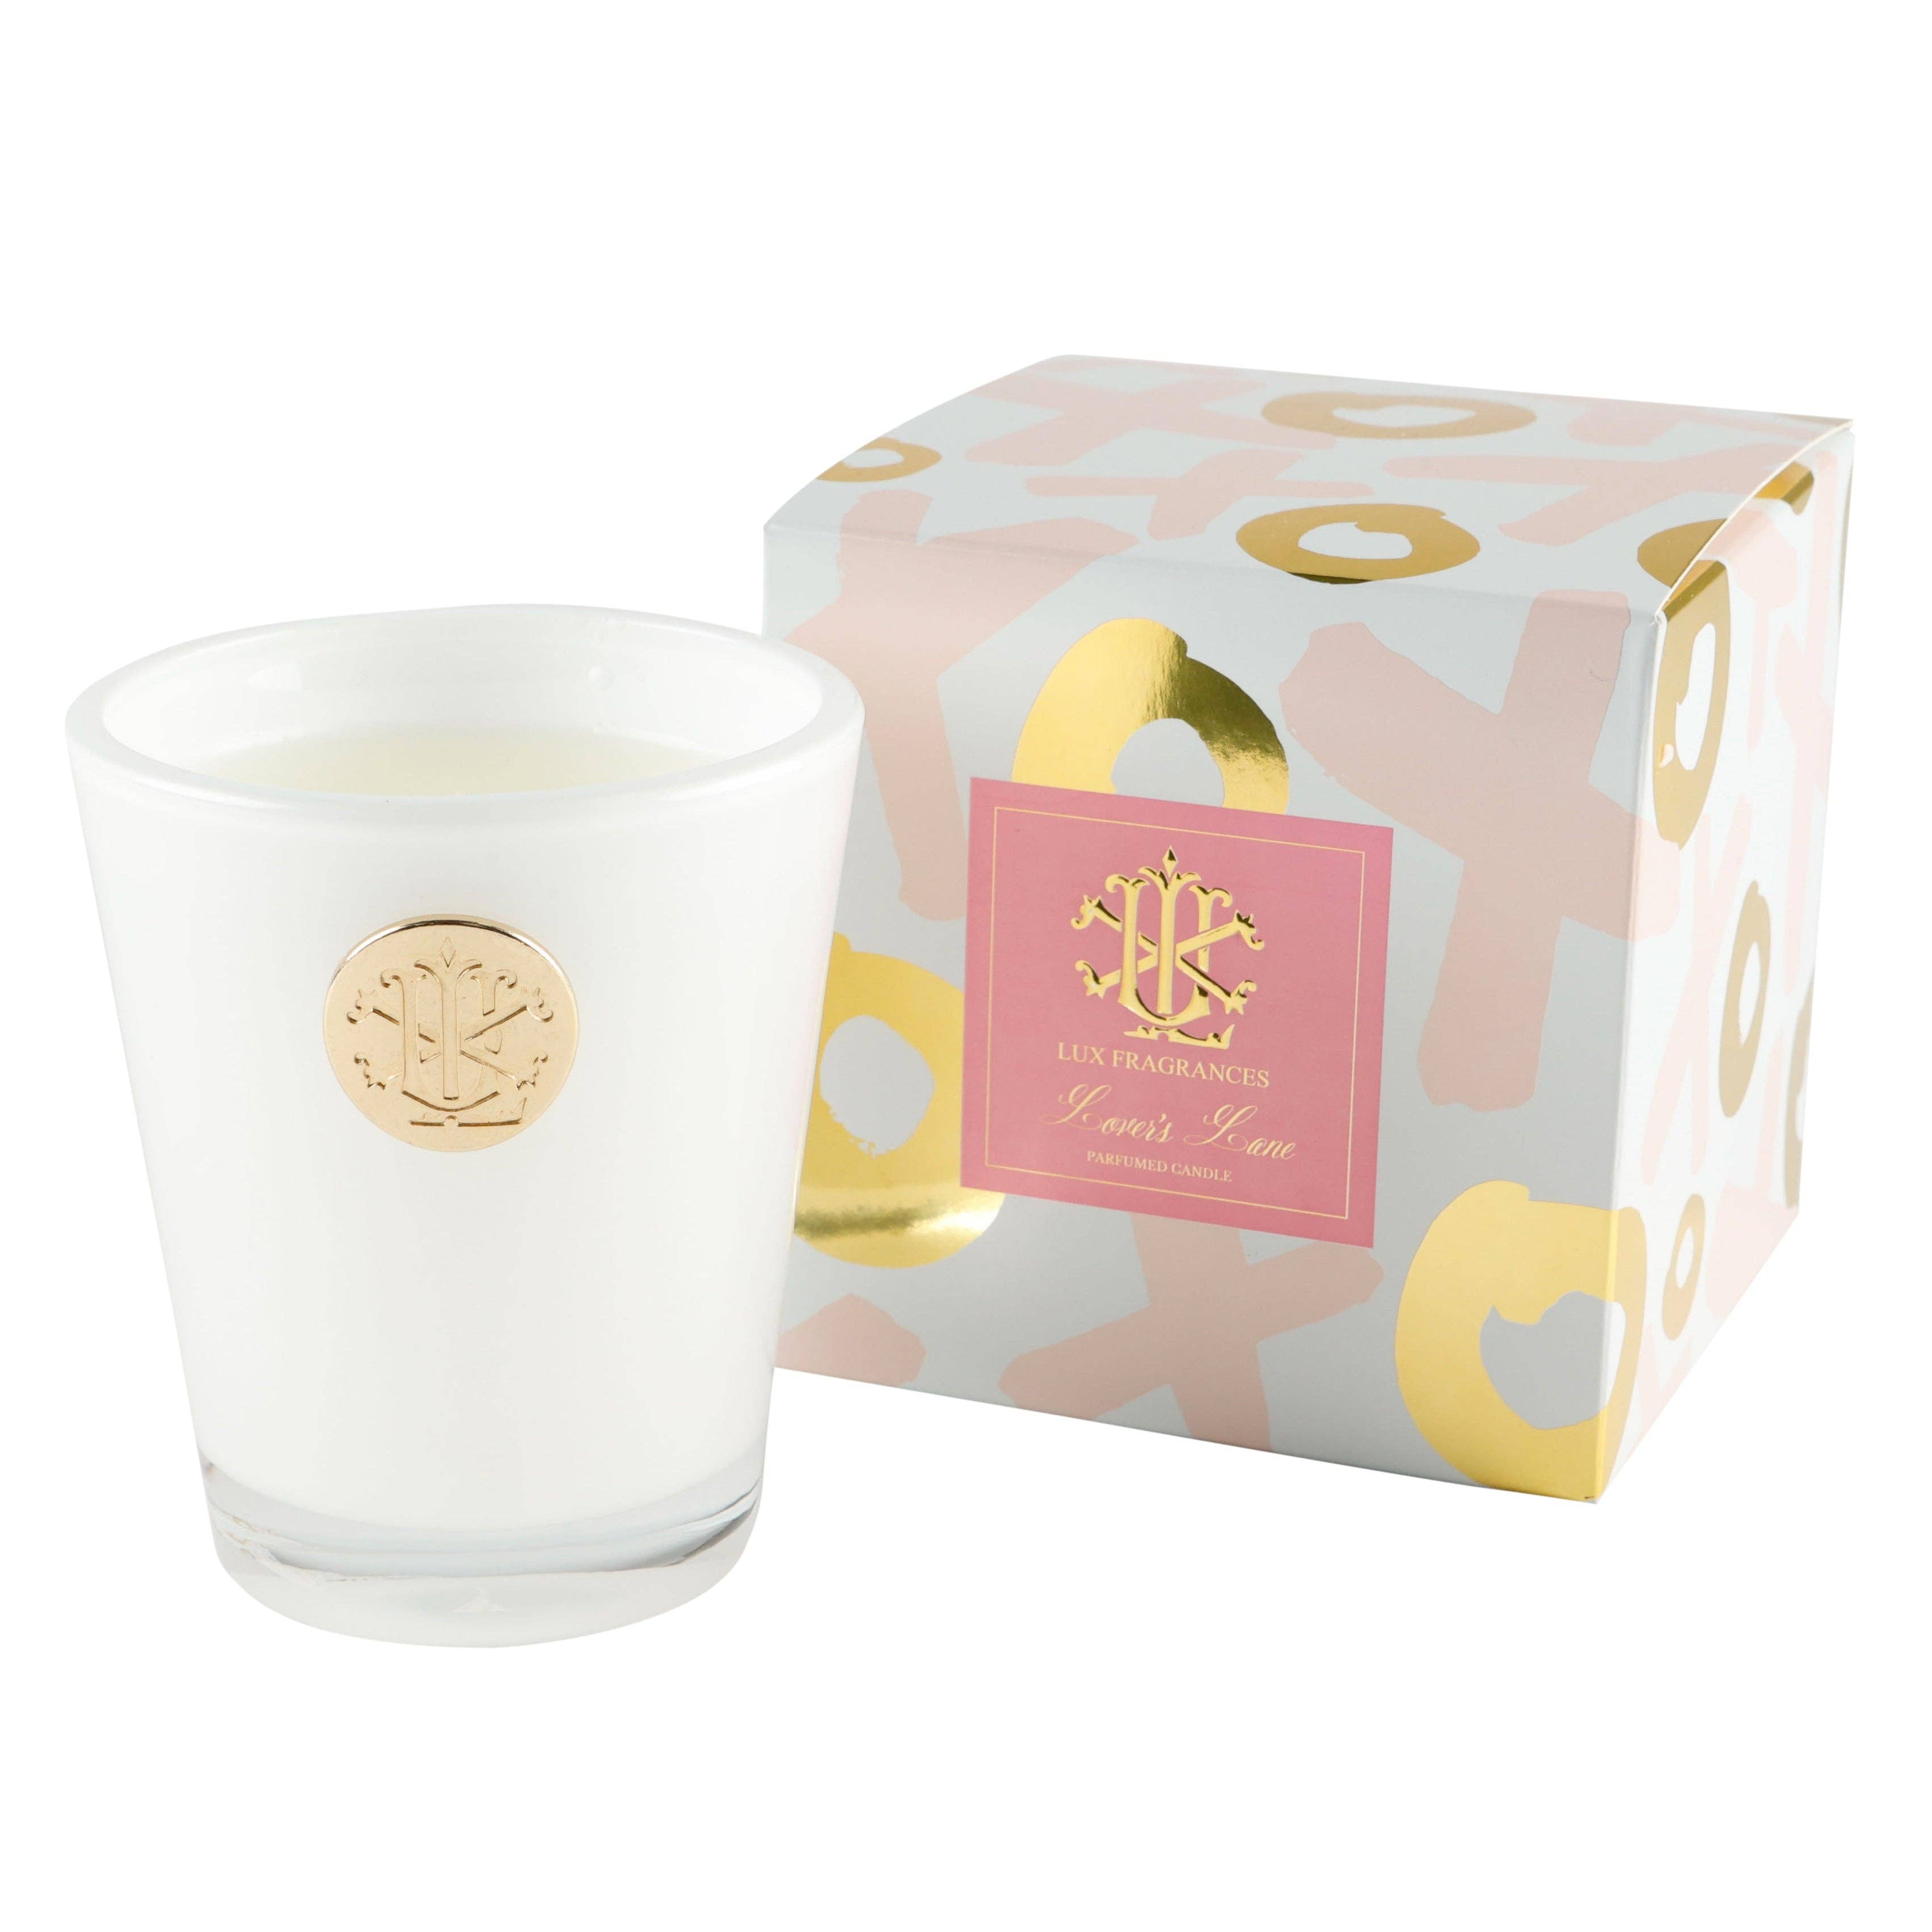 LUX FRAGRANCES - LOVER'S LANE BOX CANDLE